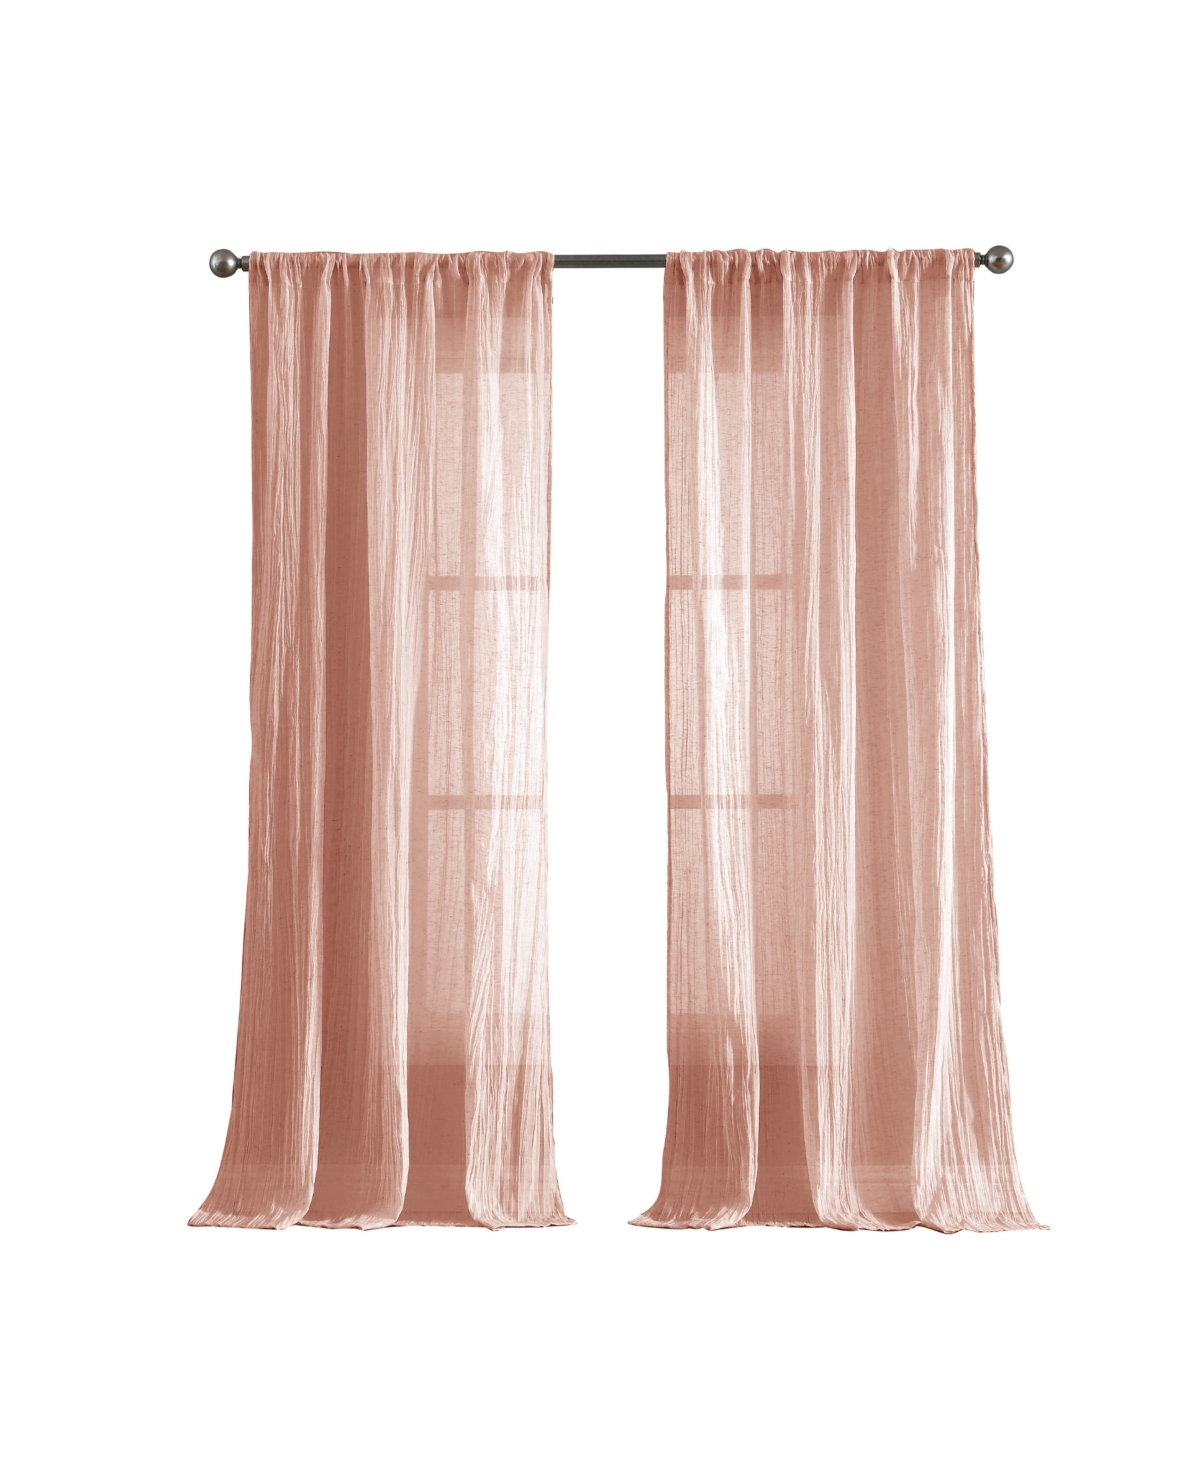 FRENCH CONNECTION CHARTER CRUSHED SEMI-SHEER ROD POCKET WINDOW CURTAIN PAIR, 84" X 50"